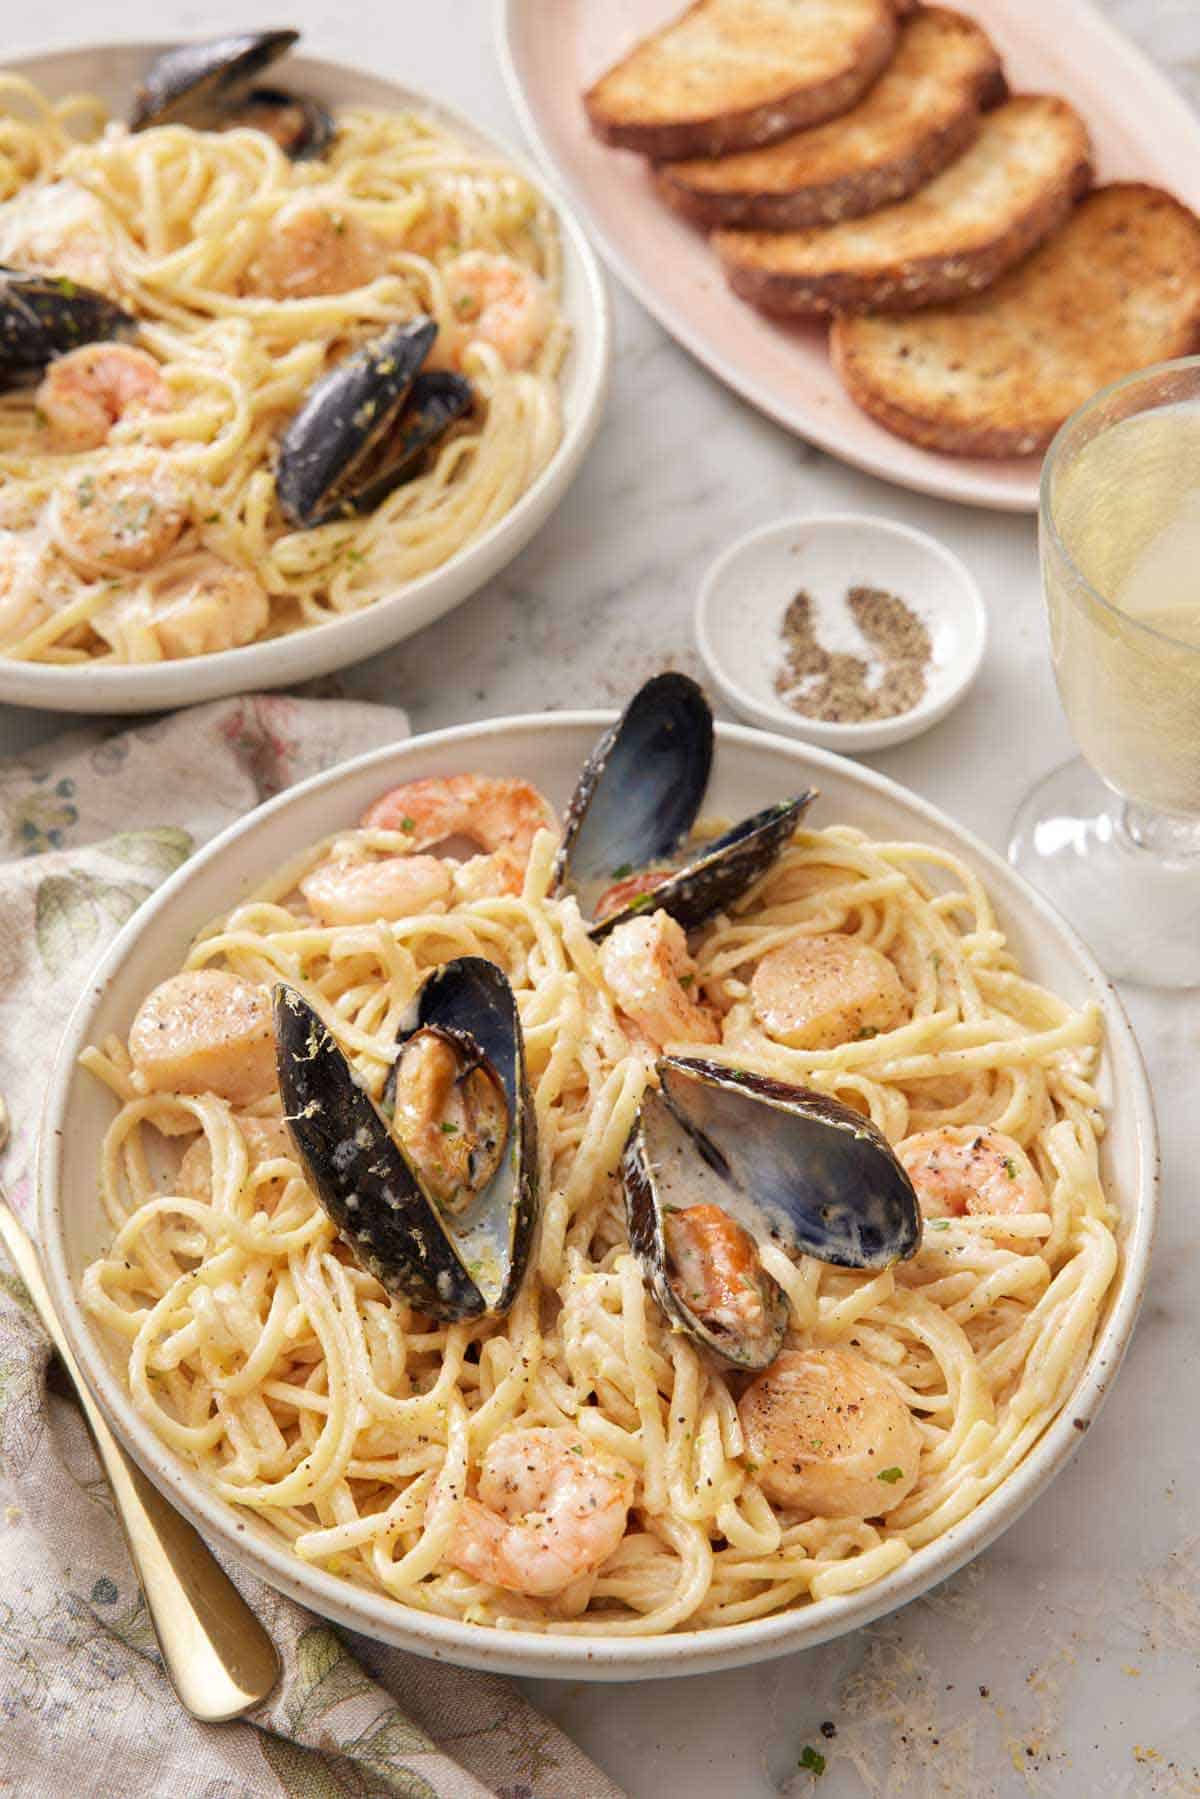 A bowl of seafood pasta with a platter of toasted bread, glass of wine, and another plate in the background.